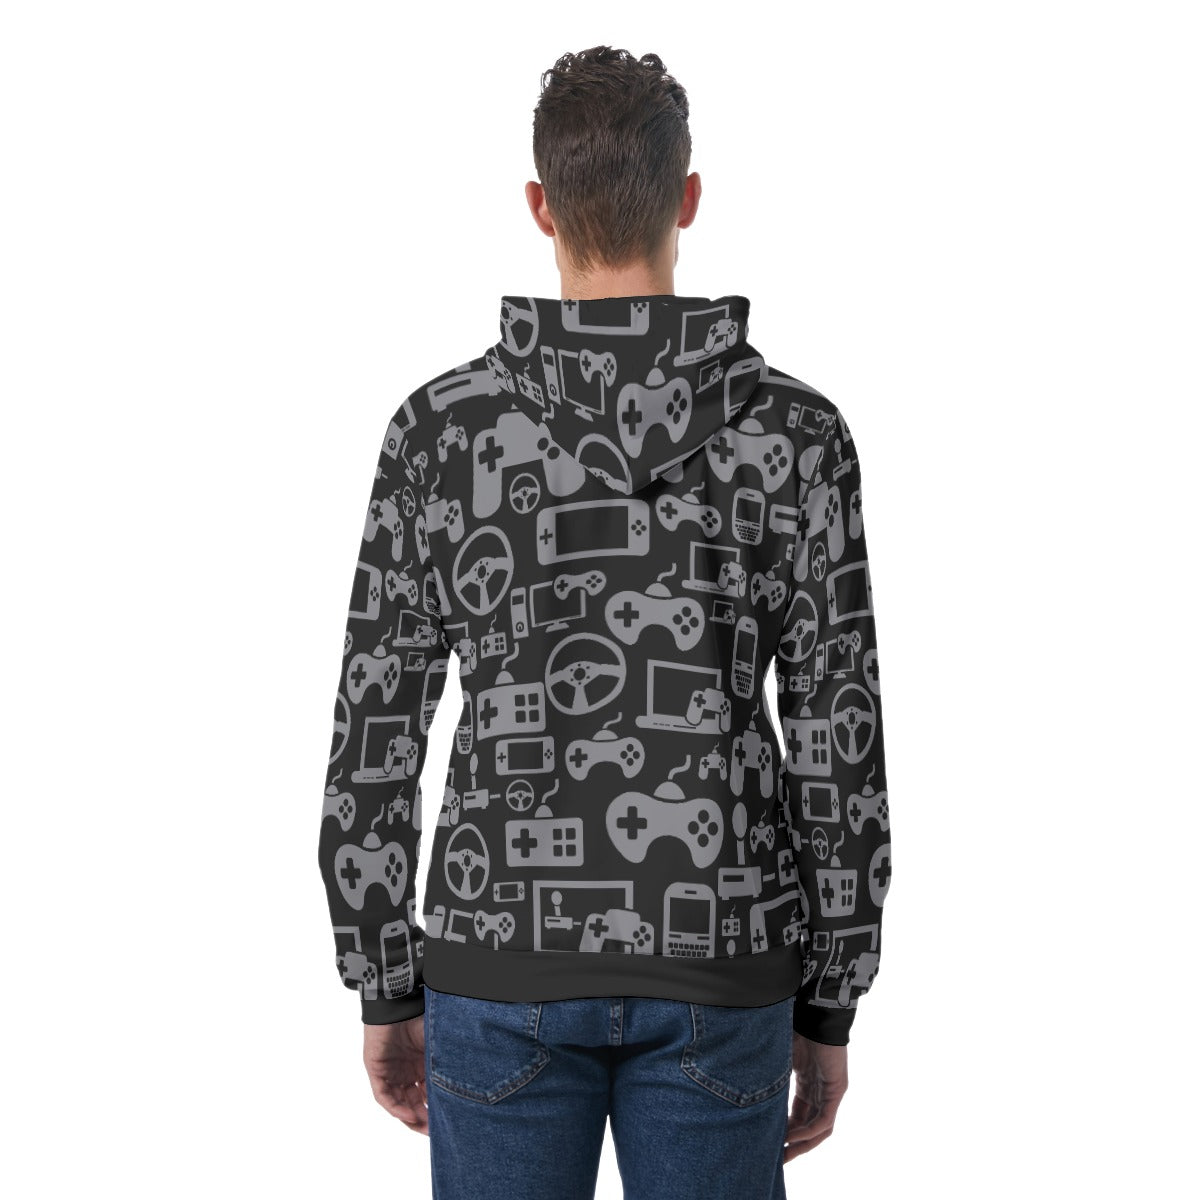 "GAME SESSION" Hoodie